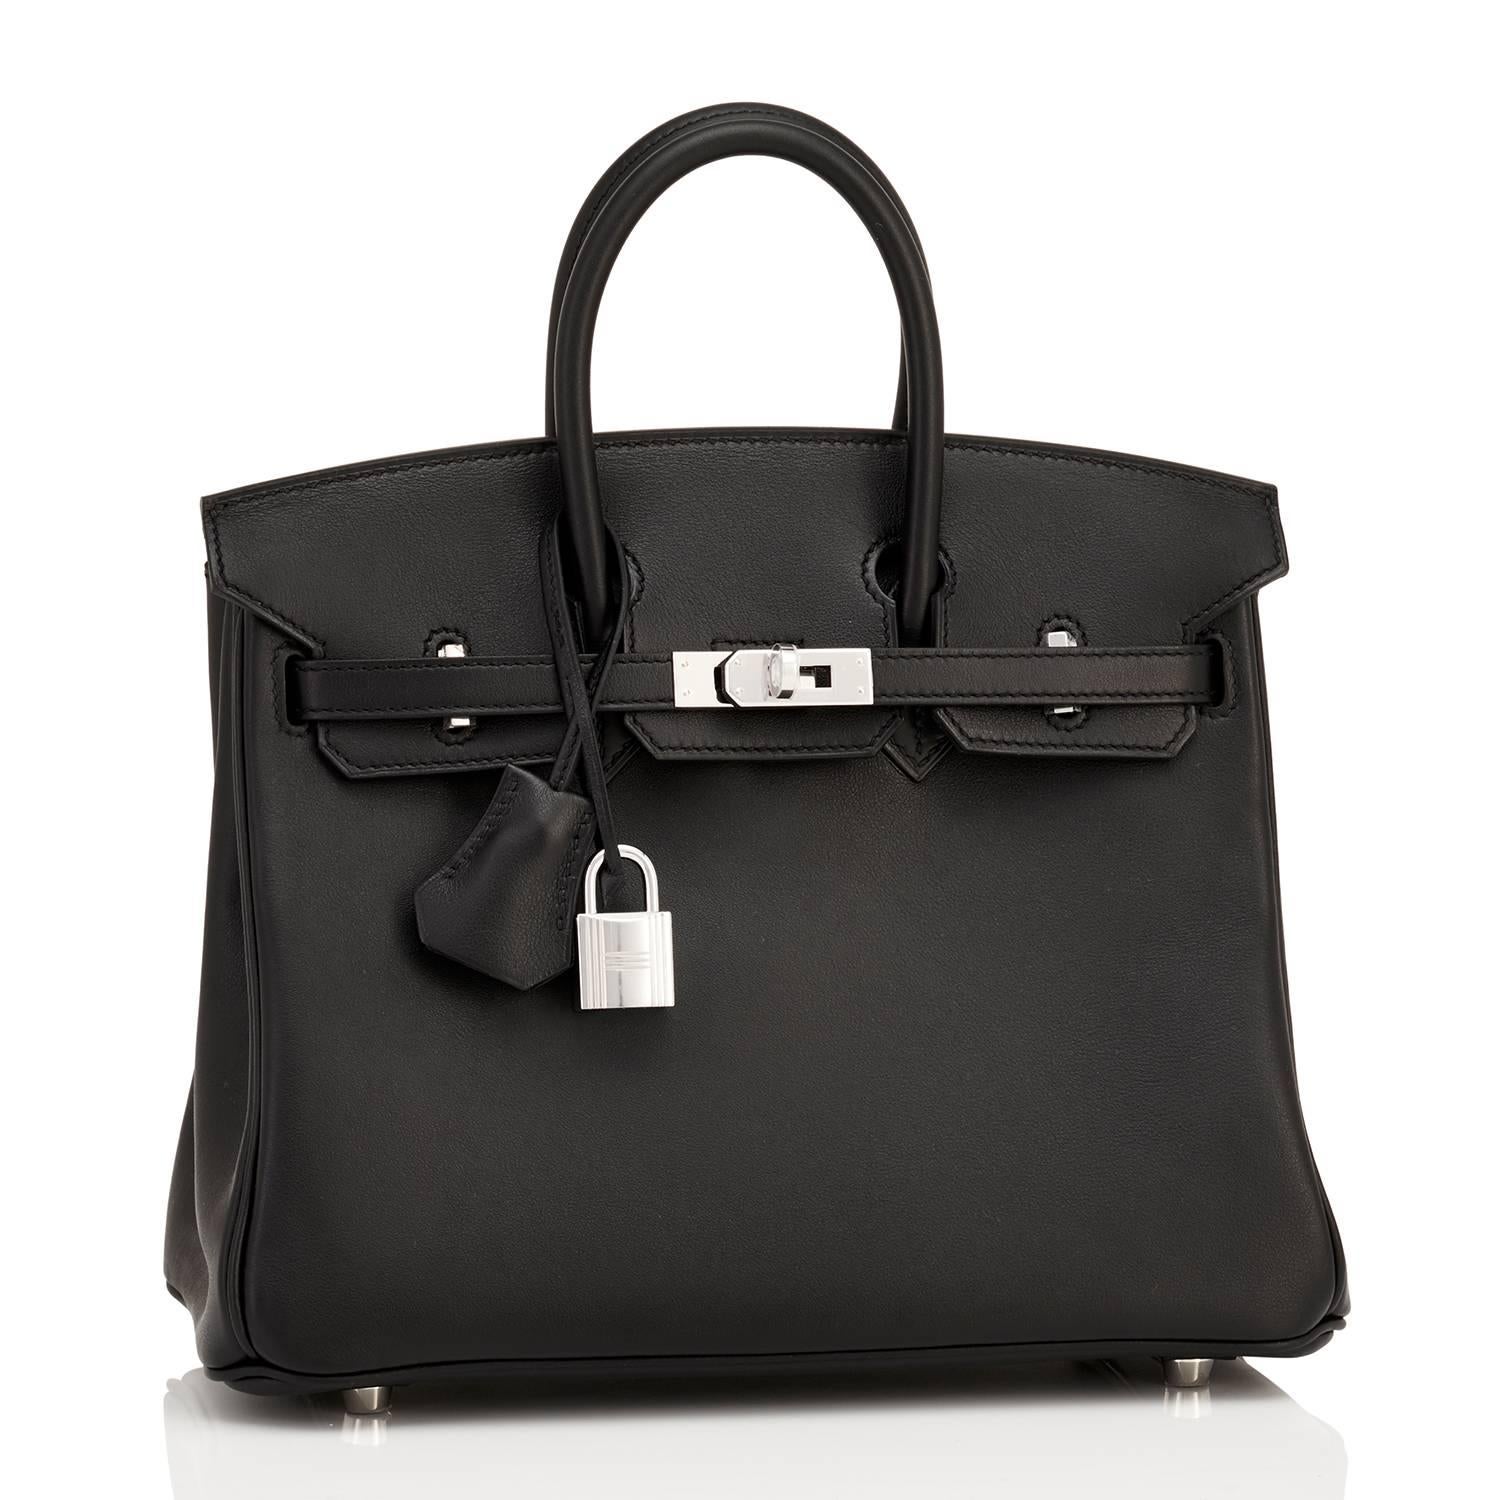 Hermes Black Baby Birkin 25cm Swift Palladium Hardware A Stamp
Brand New in Box.  Store Fresh. Pristine Condition (with plastic on hardware)
Just purchased from Hermes store; bag bears new interior A stamp.
Perfect gift! Comes full set with keys,